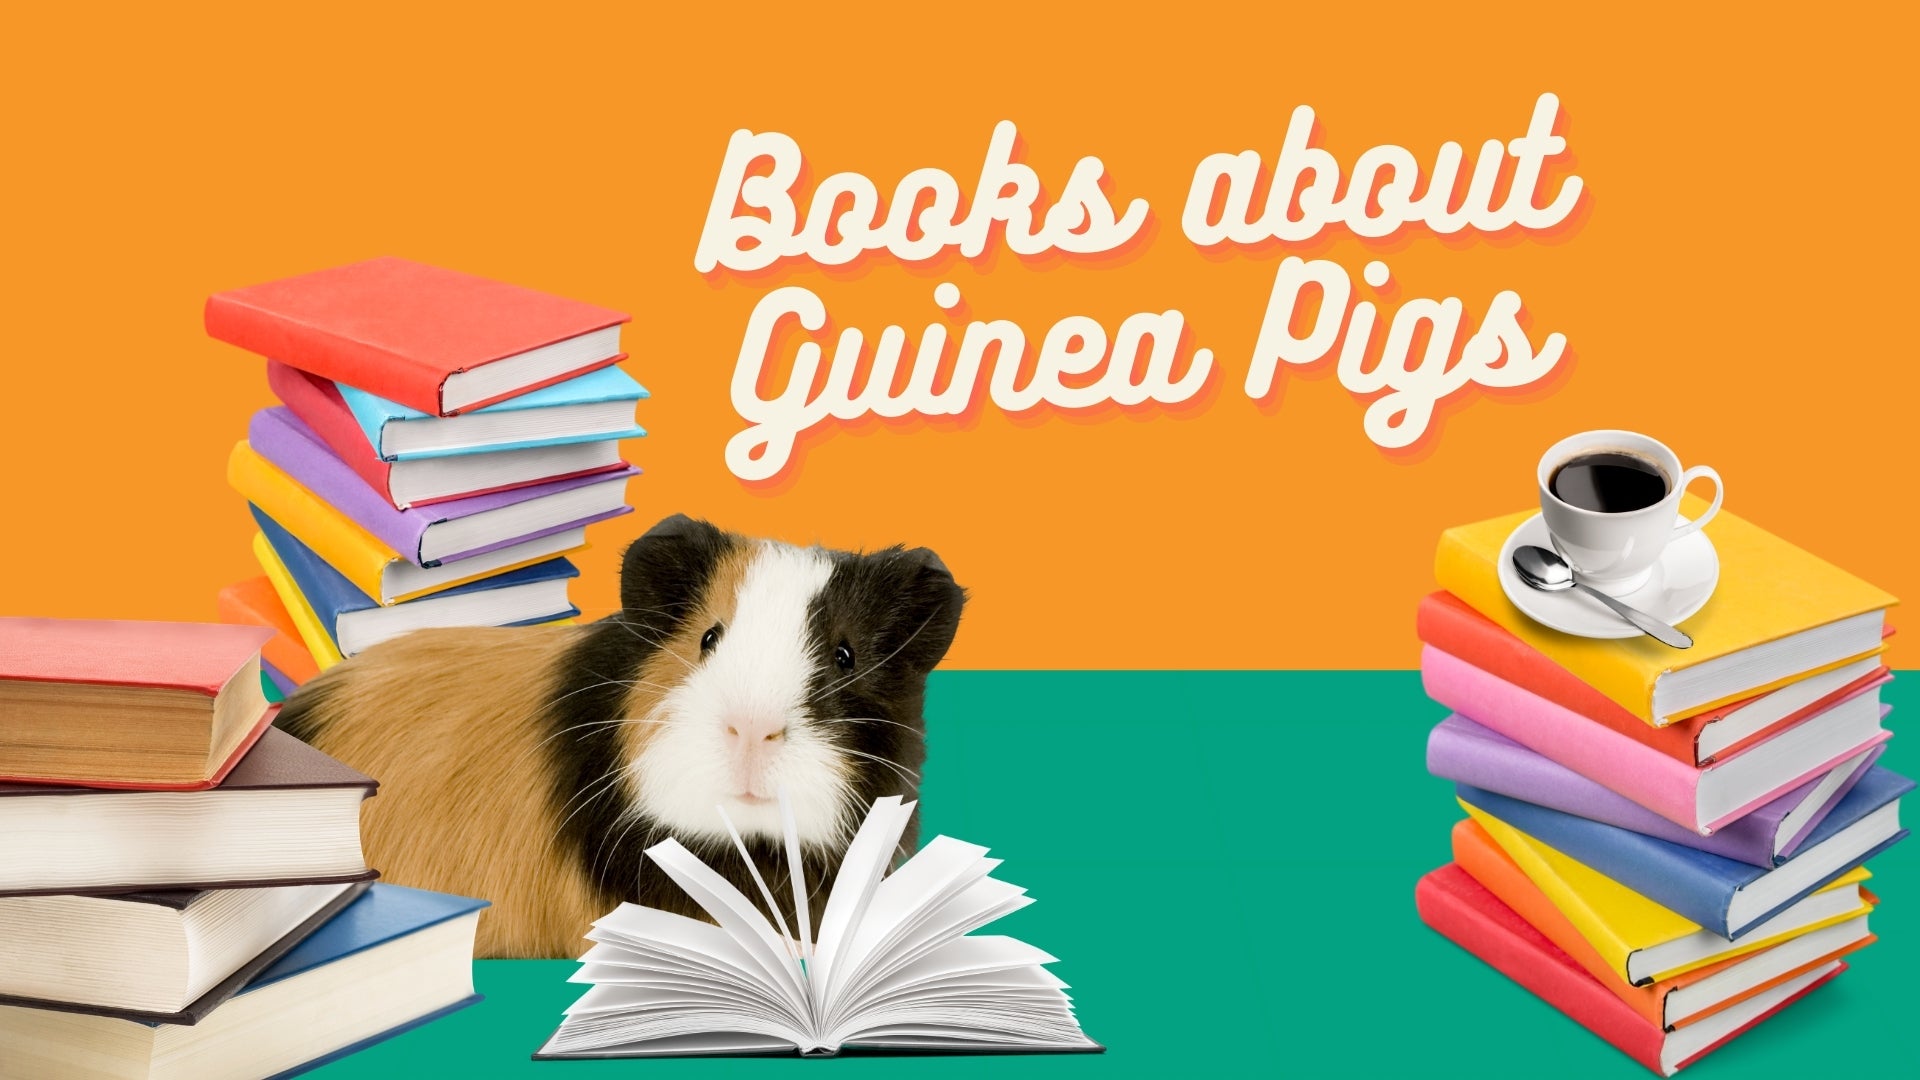 Fictional books and stories about guinea pigs kavee blog usa